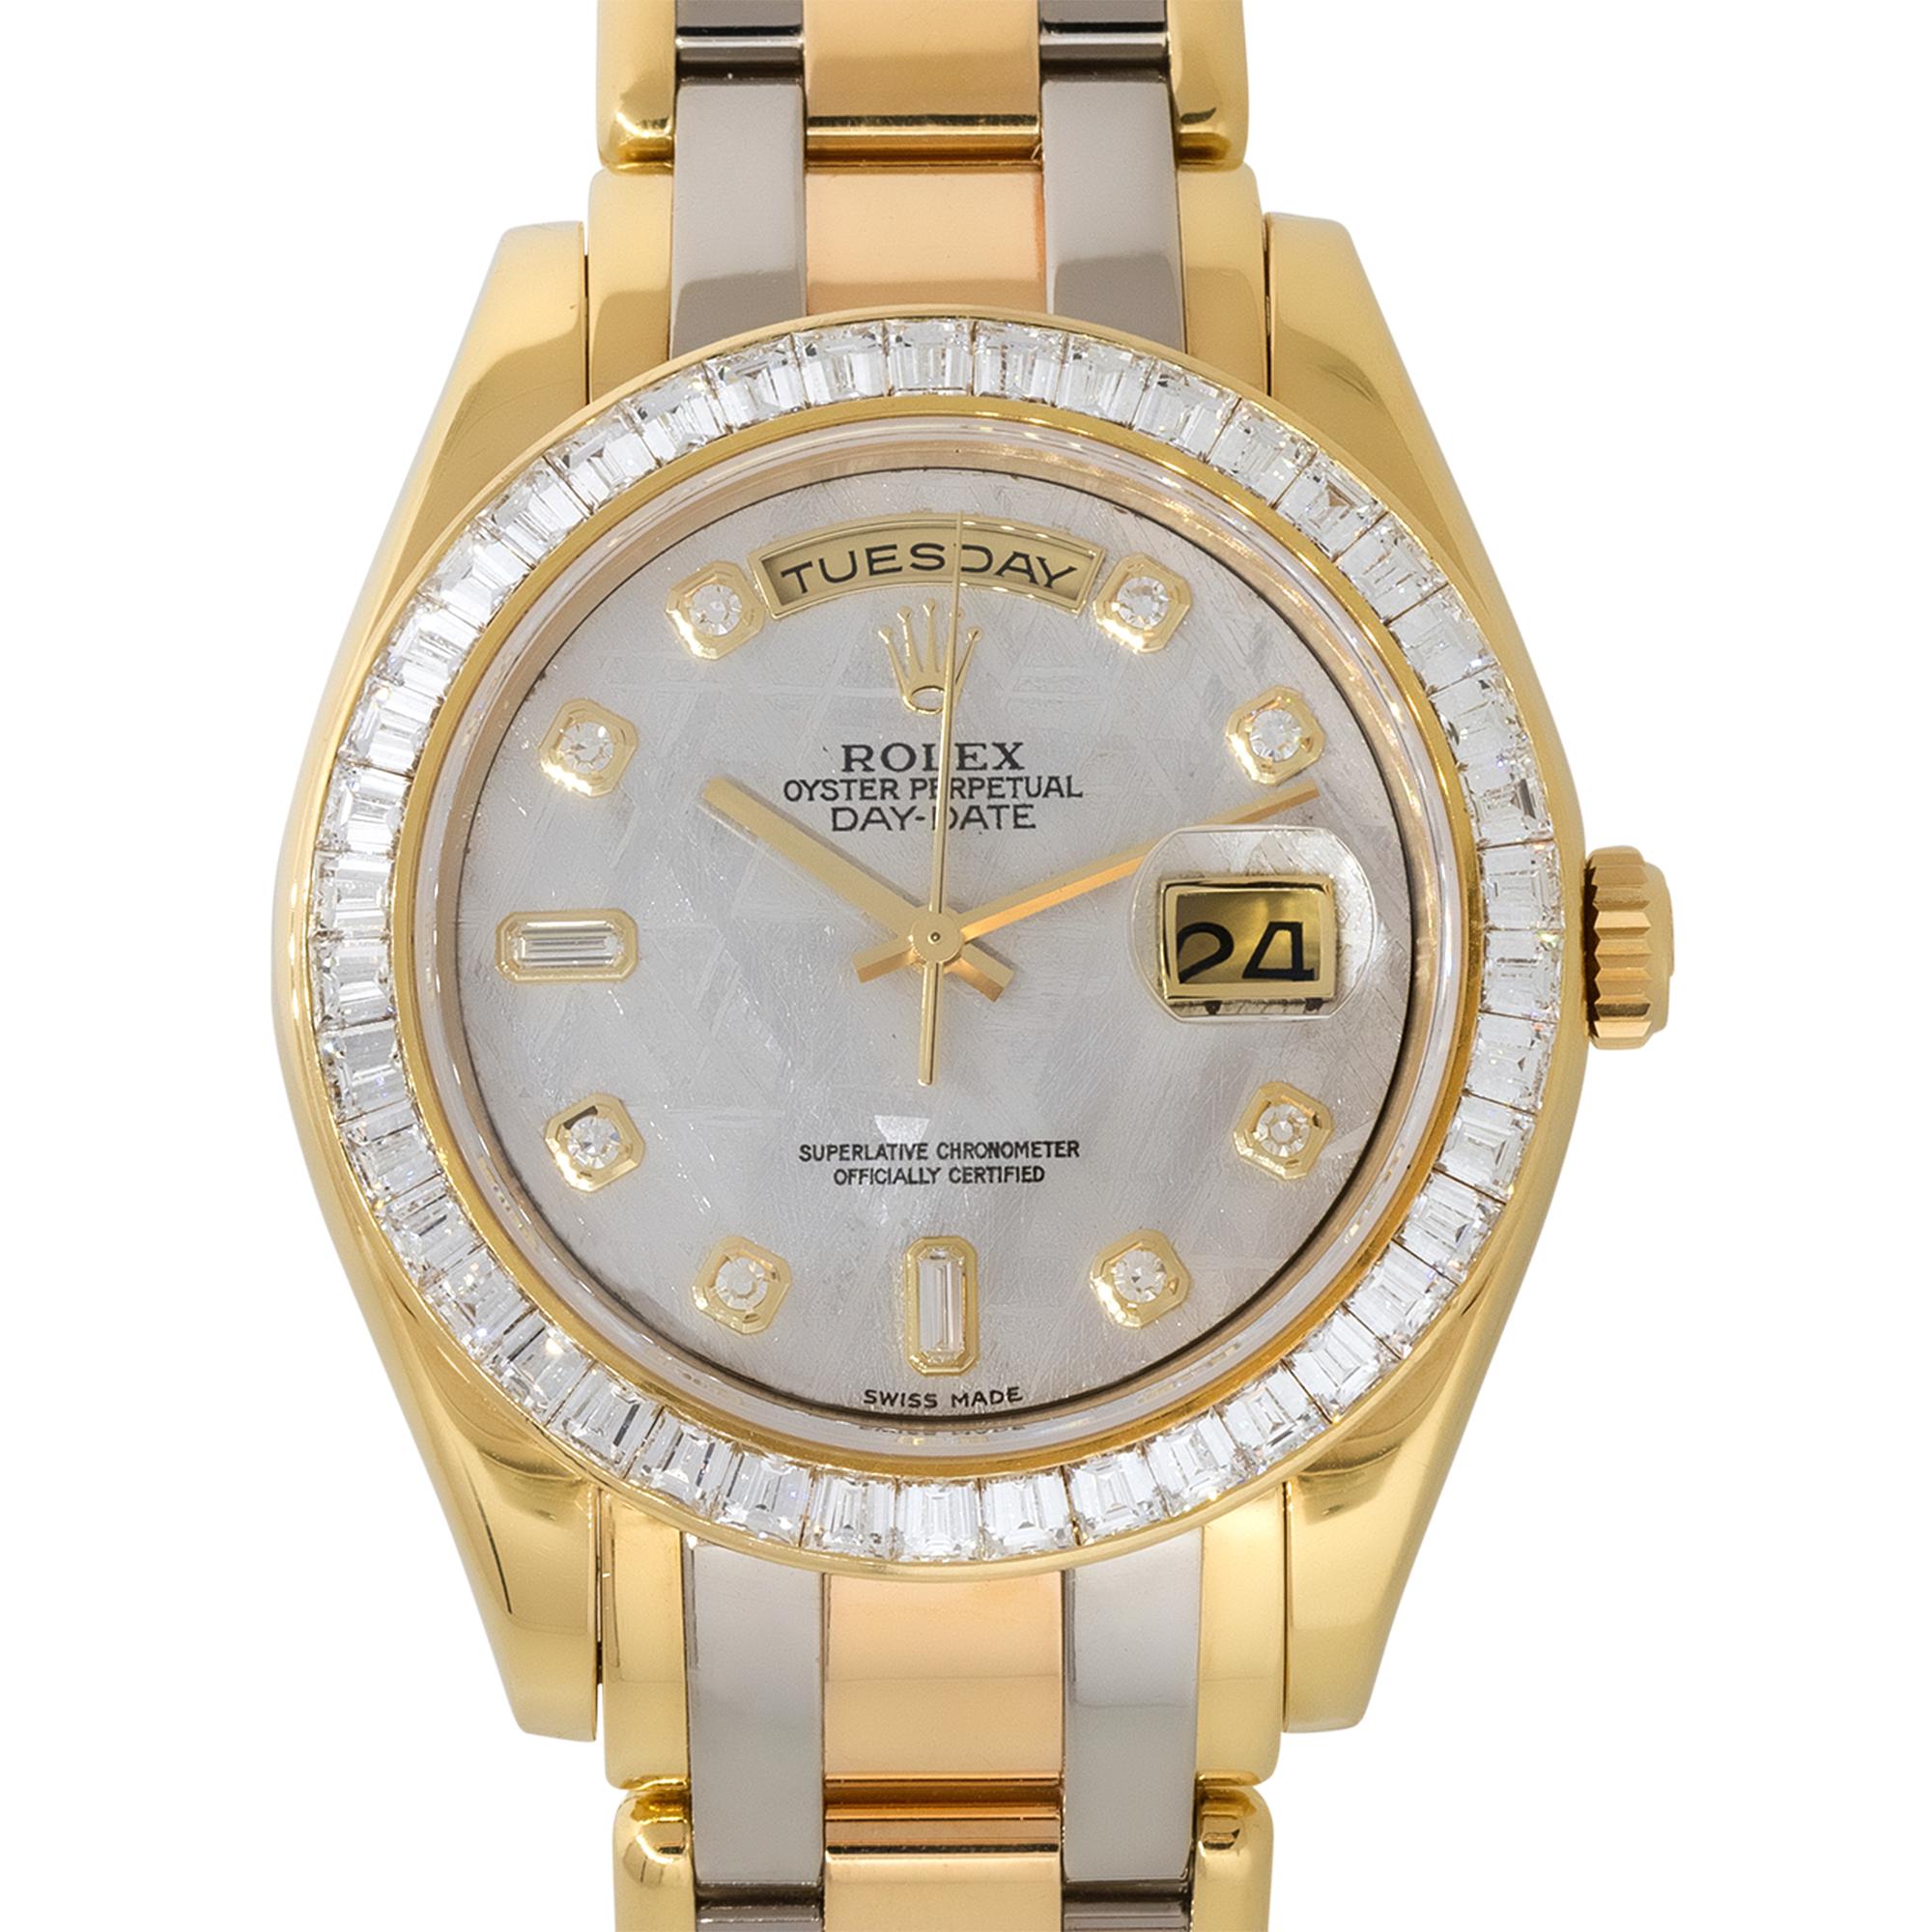 Brand: Rolex
Case Material: 18k White, Yellow and Rose gold
Case Diameter: 39mm
Crystal: Sapphire Crystal
Bezel: 18k Yellow Gold bezel with Diamonds
Dial: Meteorite Dial with yellow gold hands and Diamond hour markers. Date can be found at 3